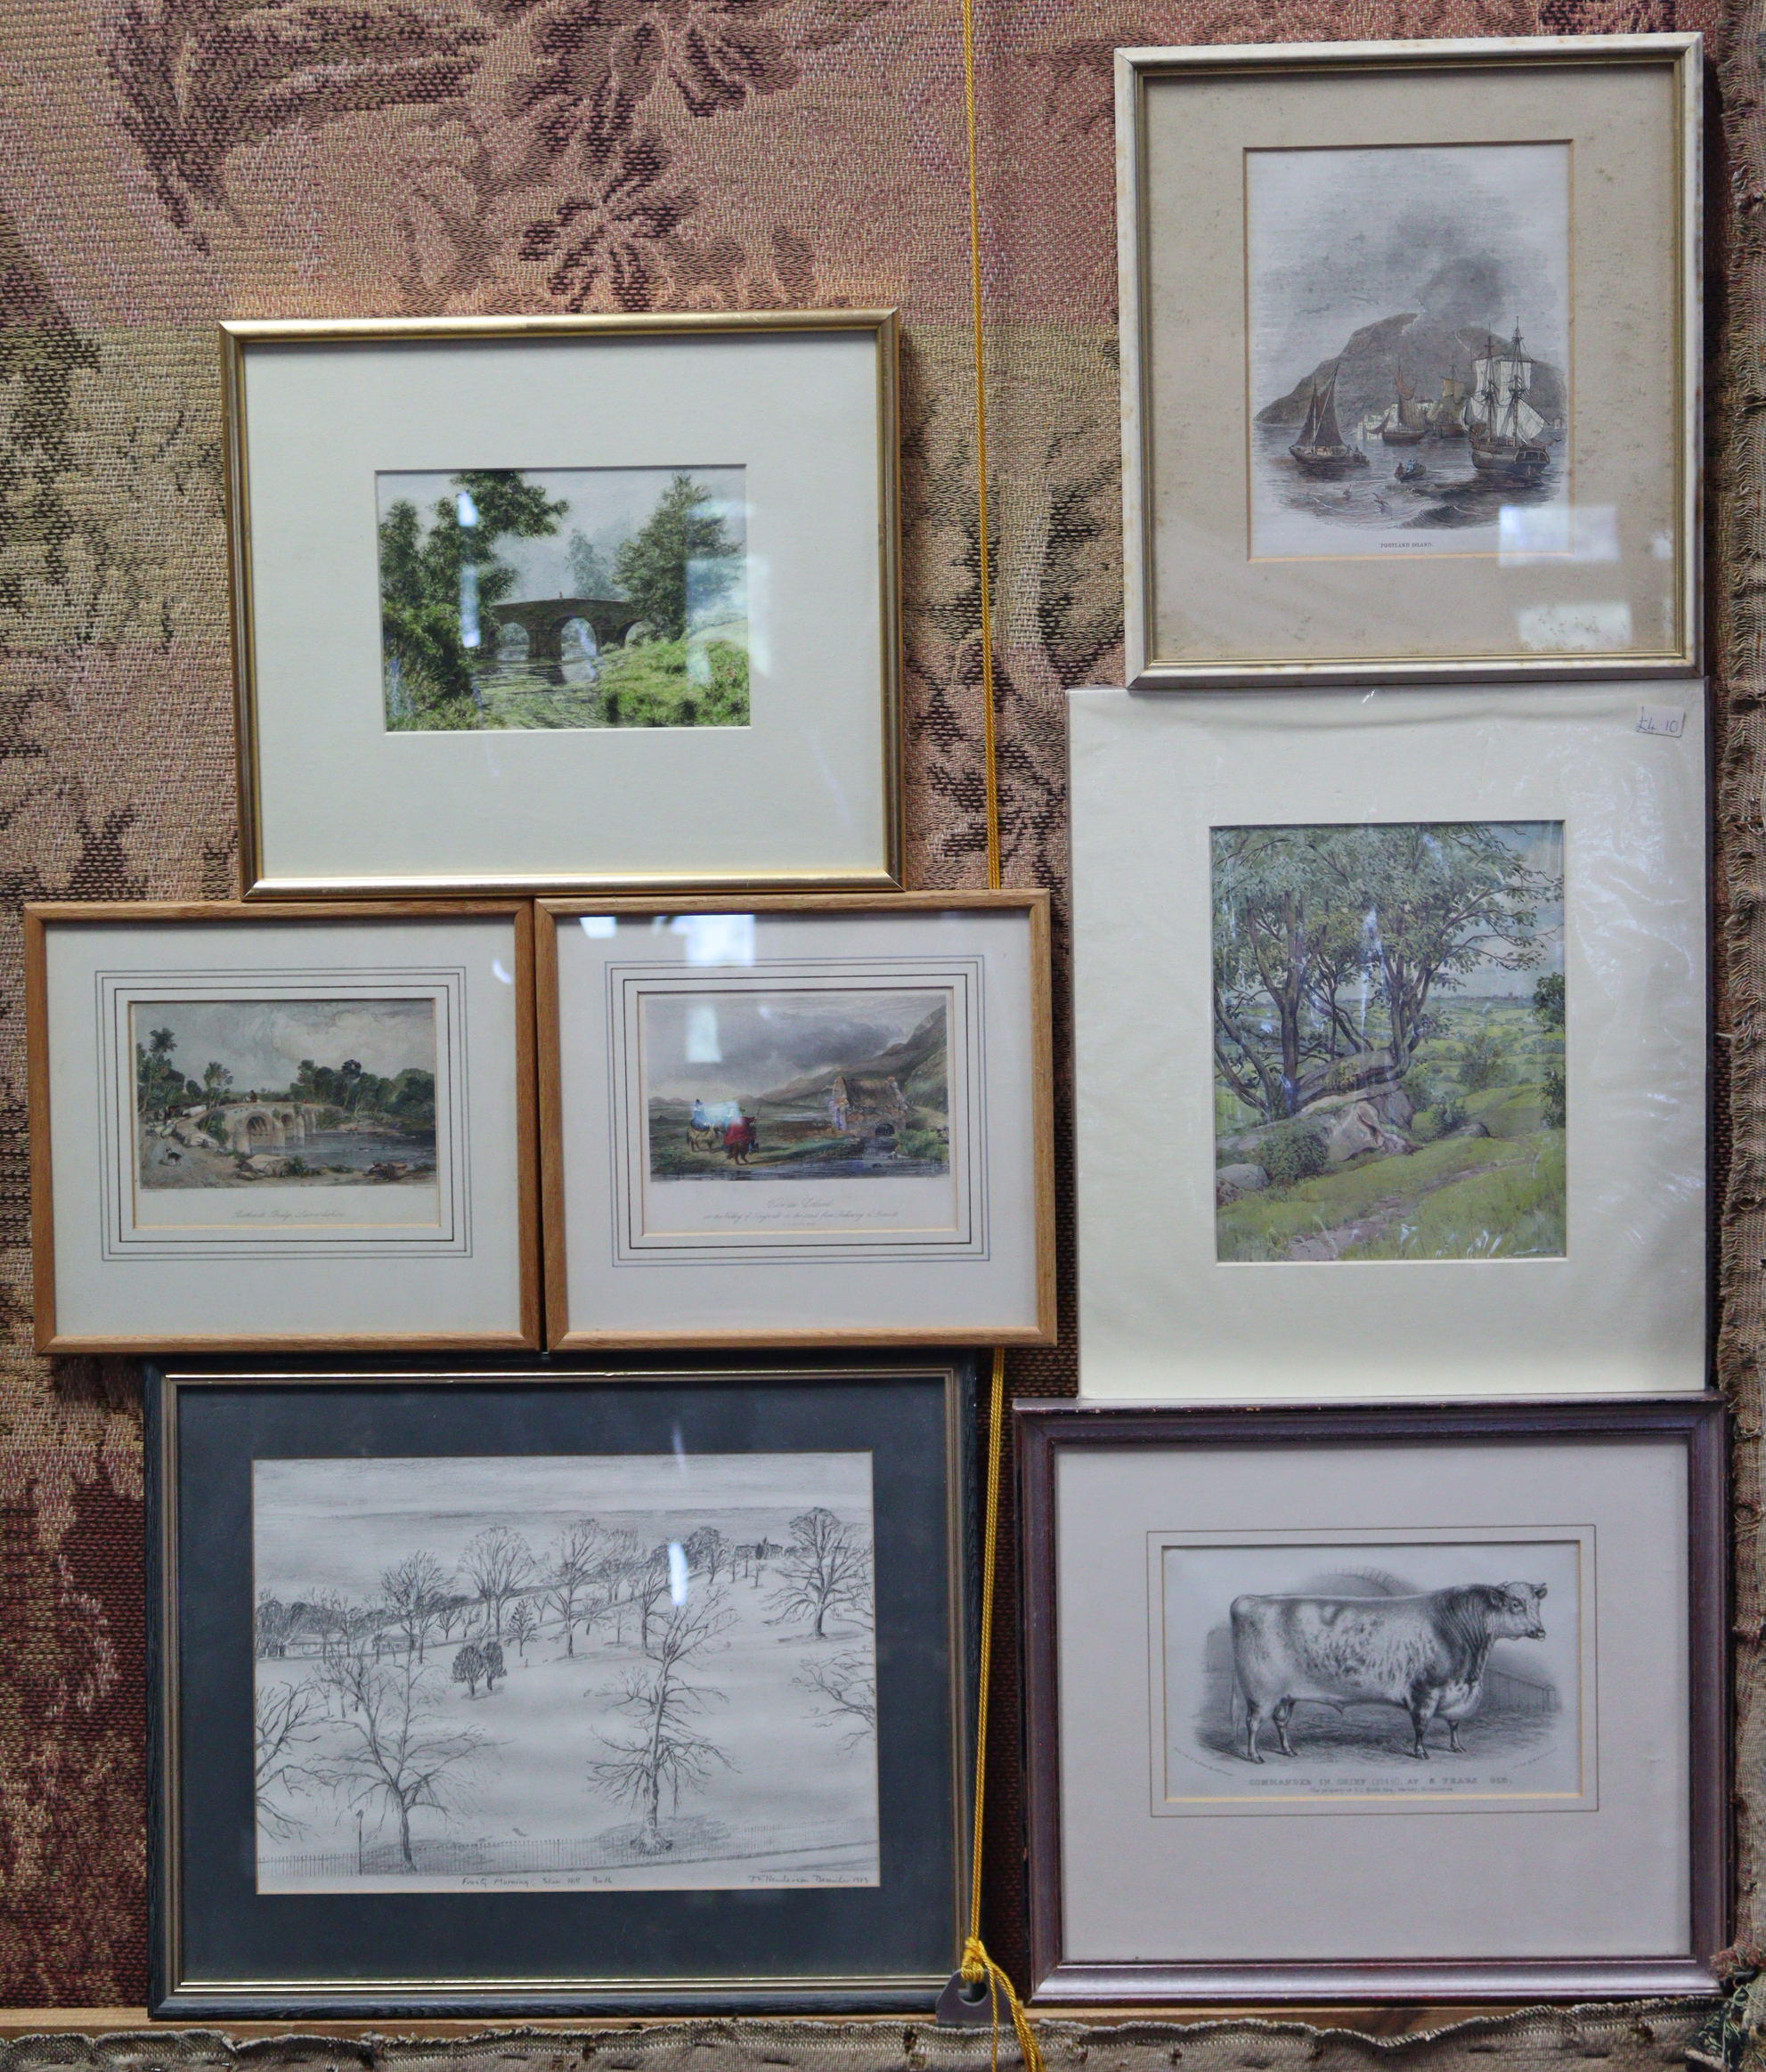 A collection of various decorative paintings, prints, & picture frames. (Provenance: The Estate of